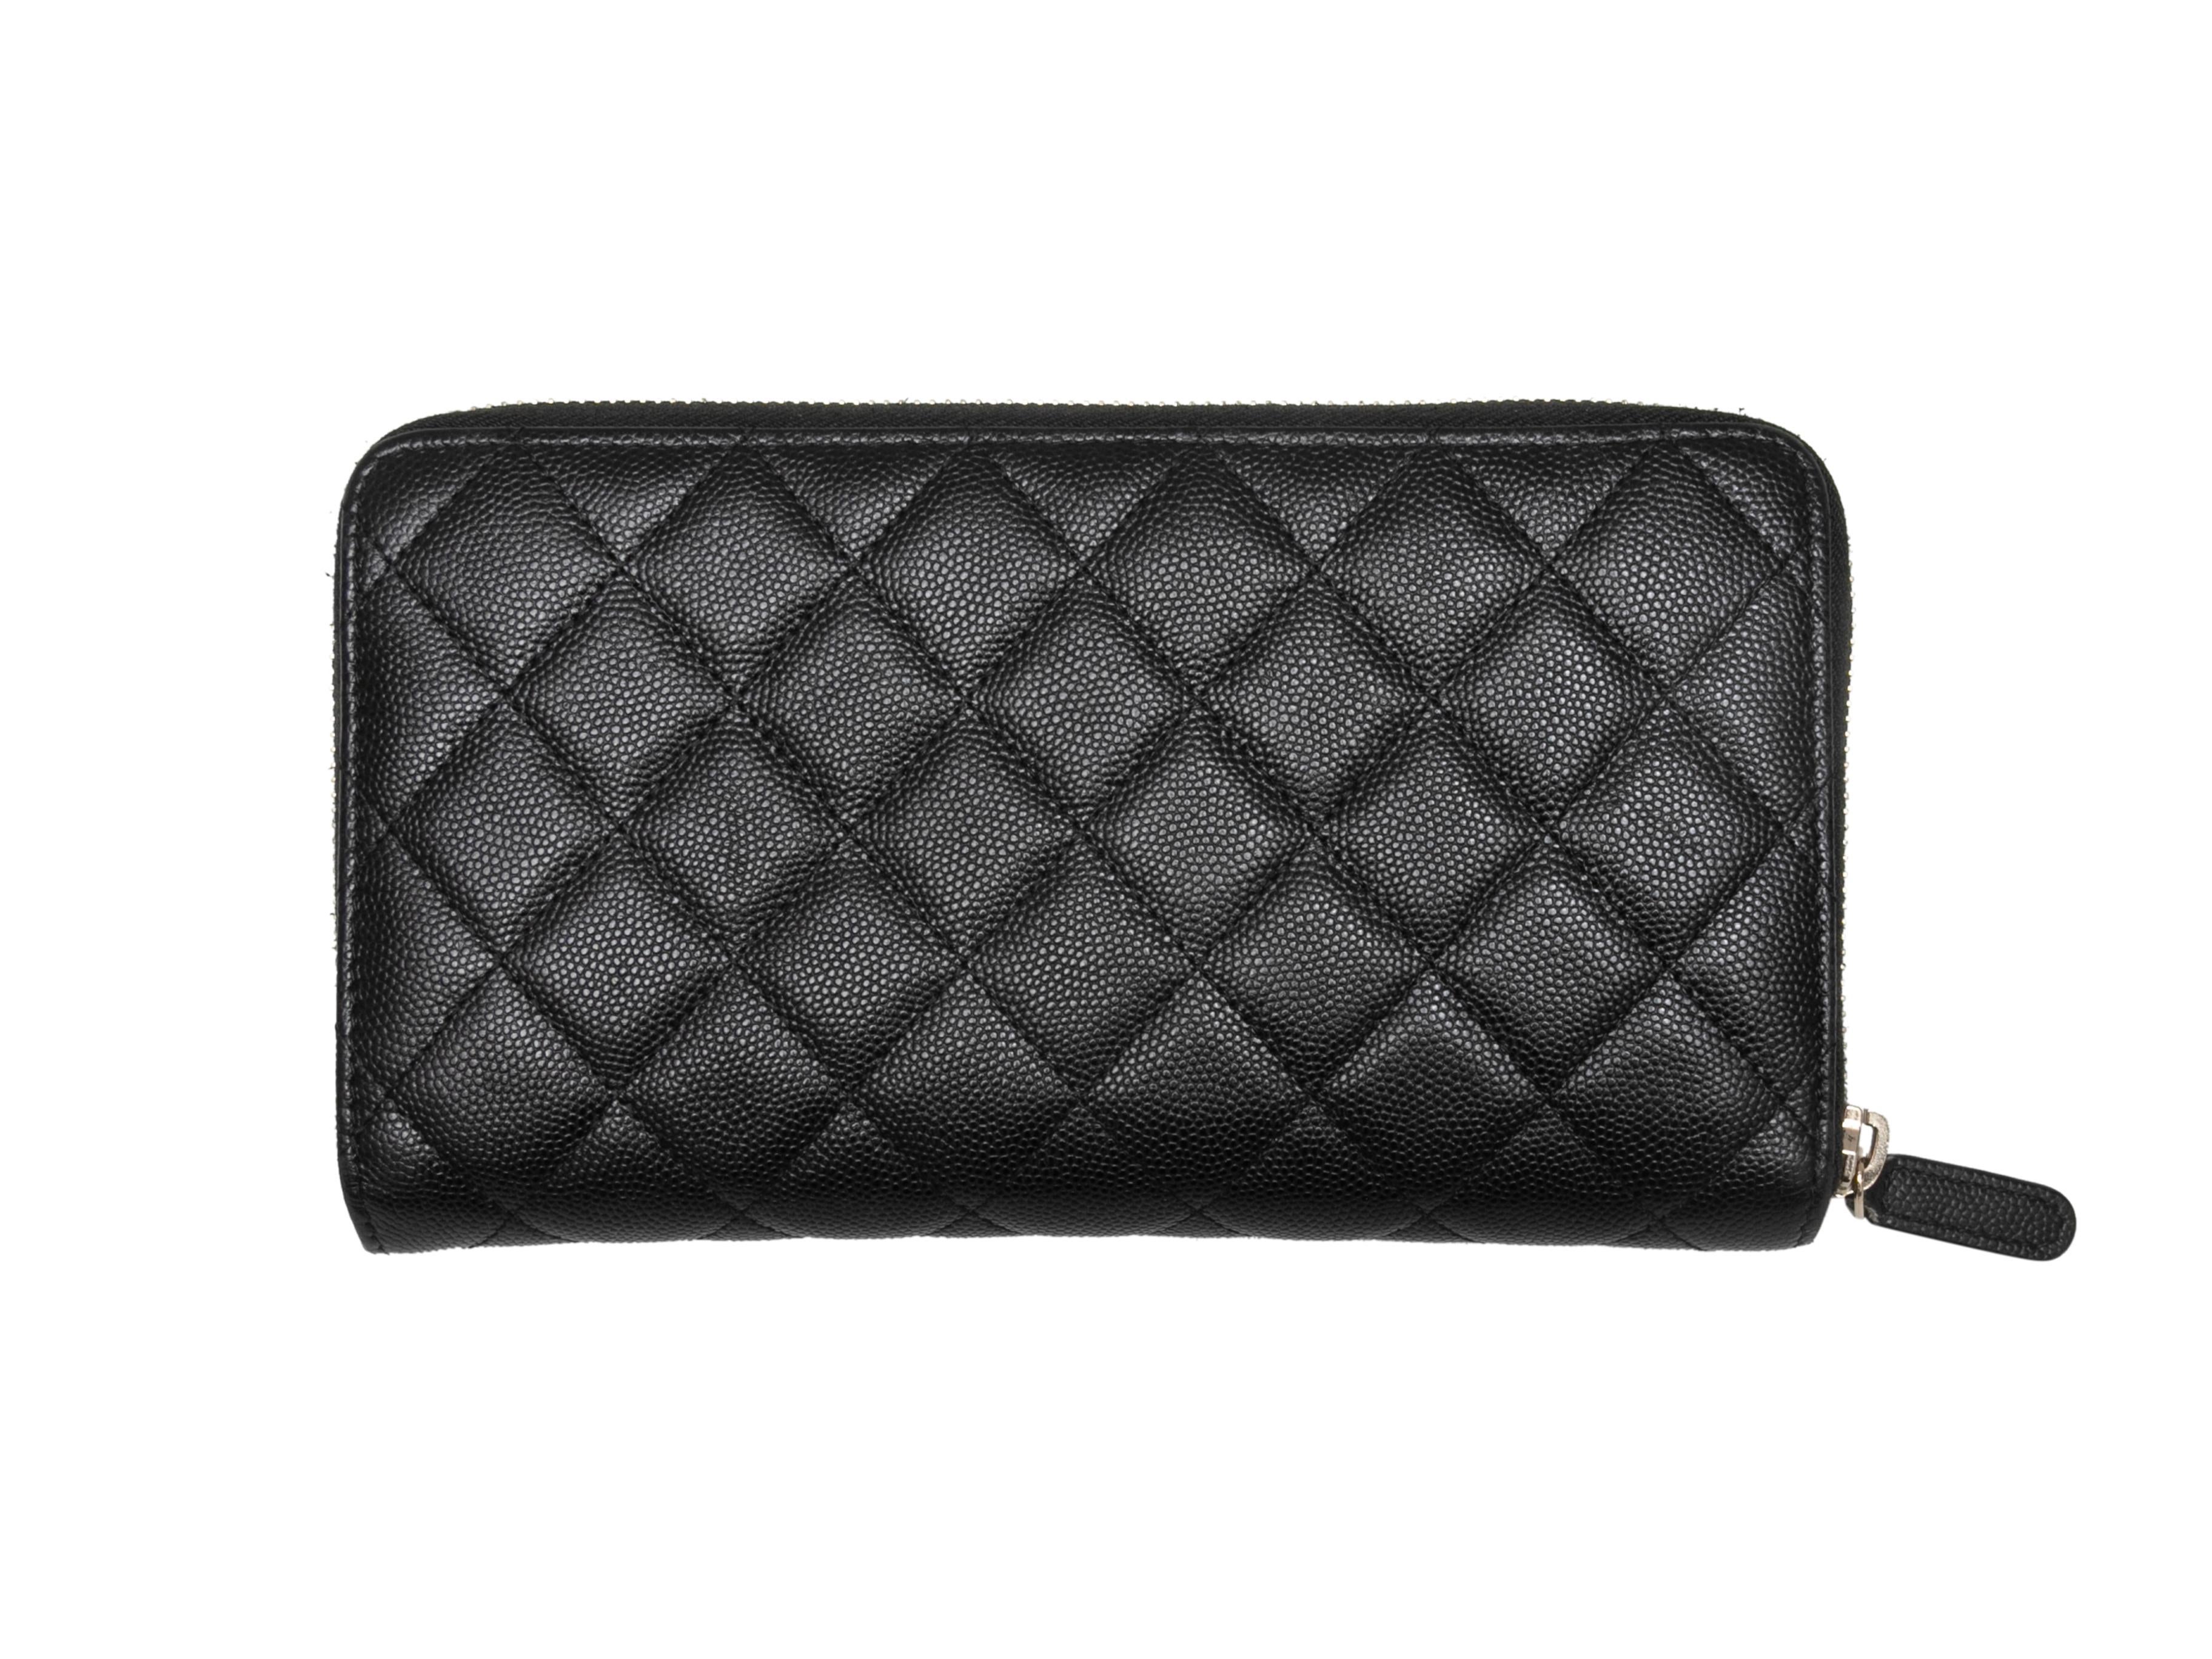 Black caviar leather quilted continental wallet by Chanel. Circa 2018-2019 Gold-tone hardware. Multiple interior card and cash slots. Top zip closure. 8